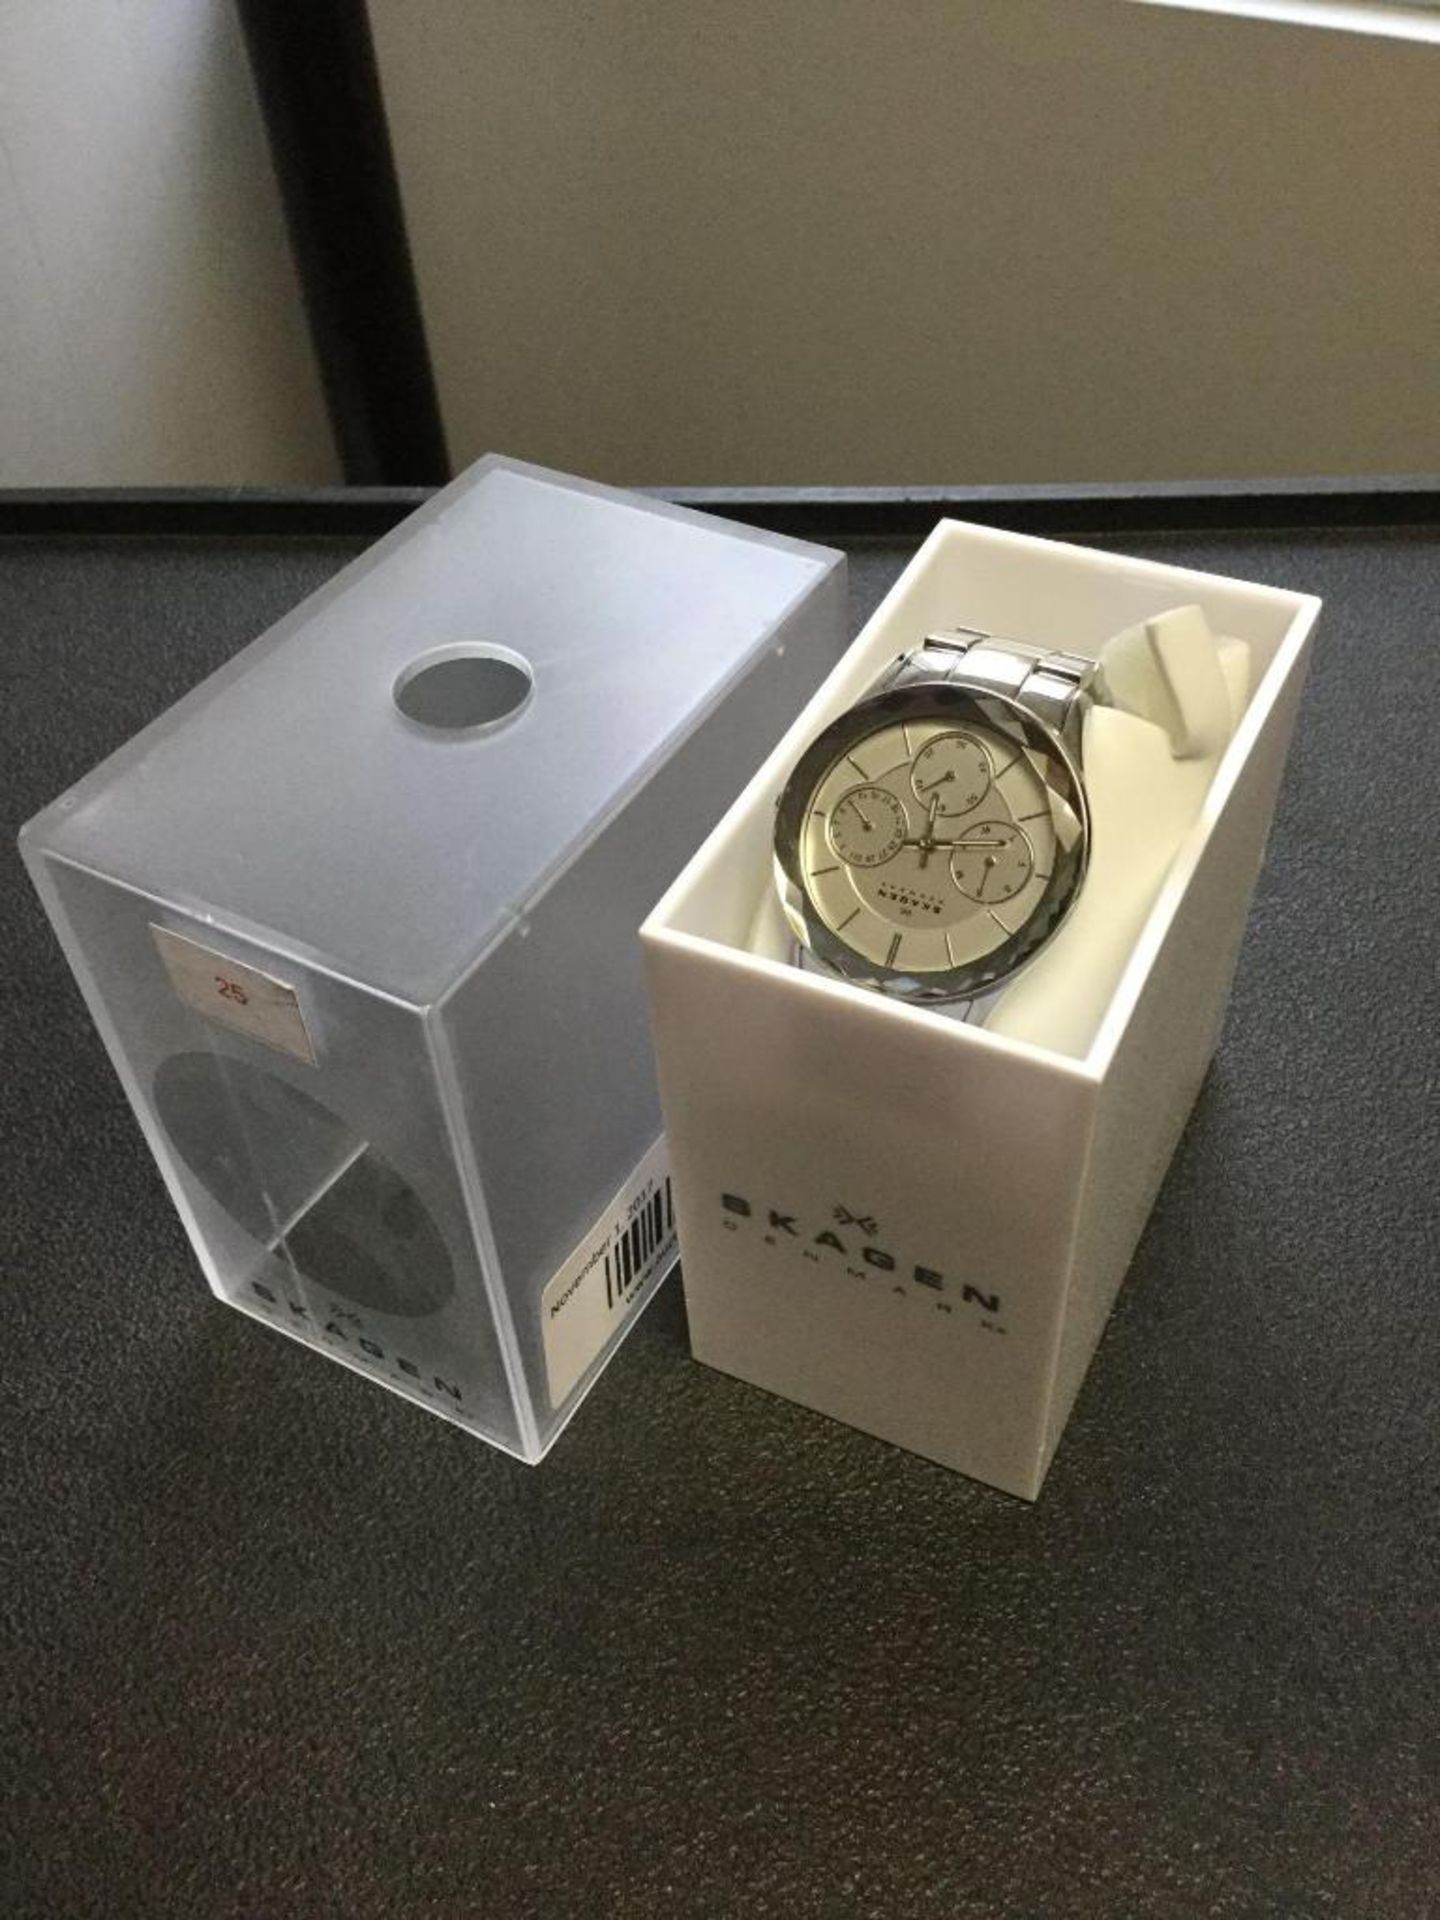 Skagen Denmark Watch Silver face and band with box